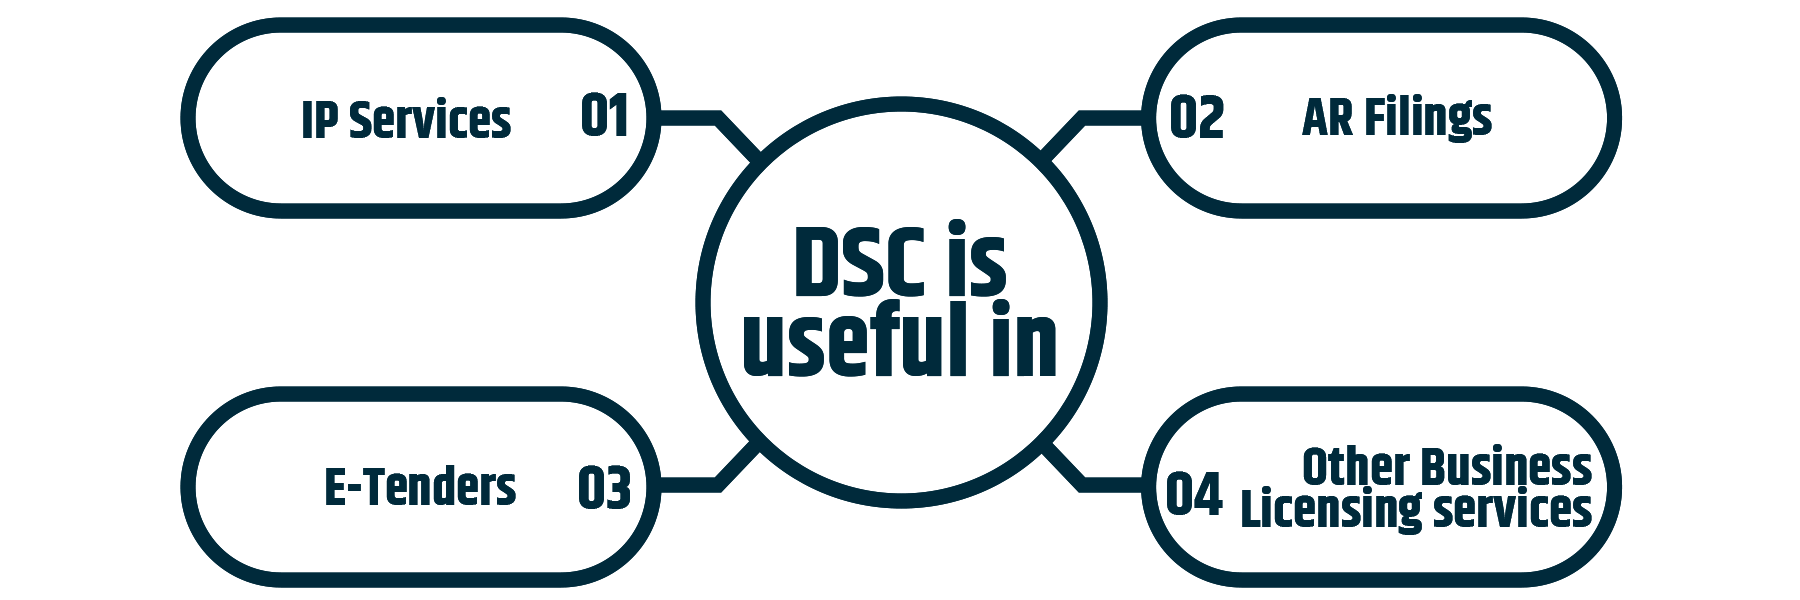 DSC is useful for ip services, e-tenders, AR filing and business registration services